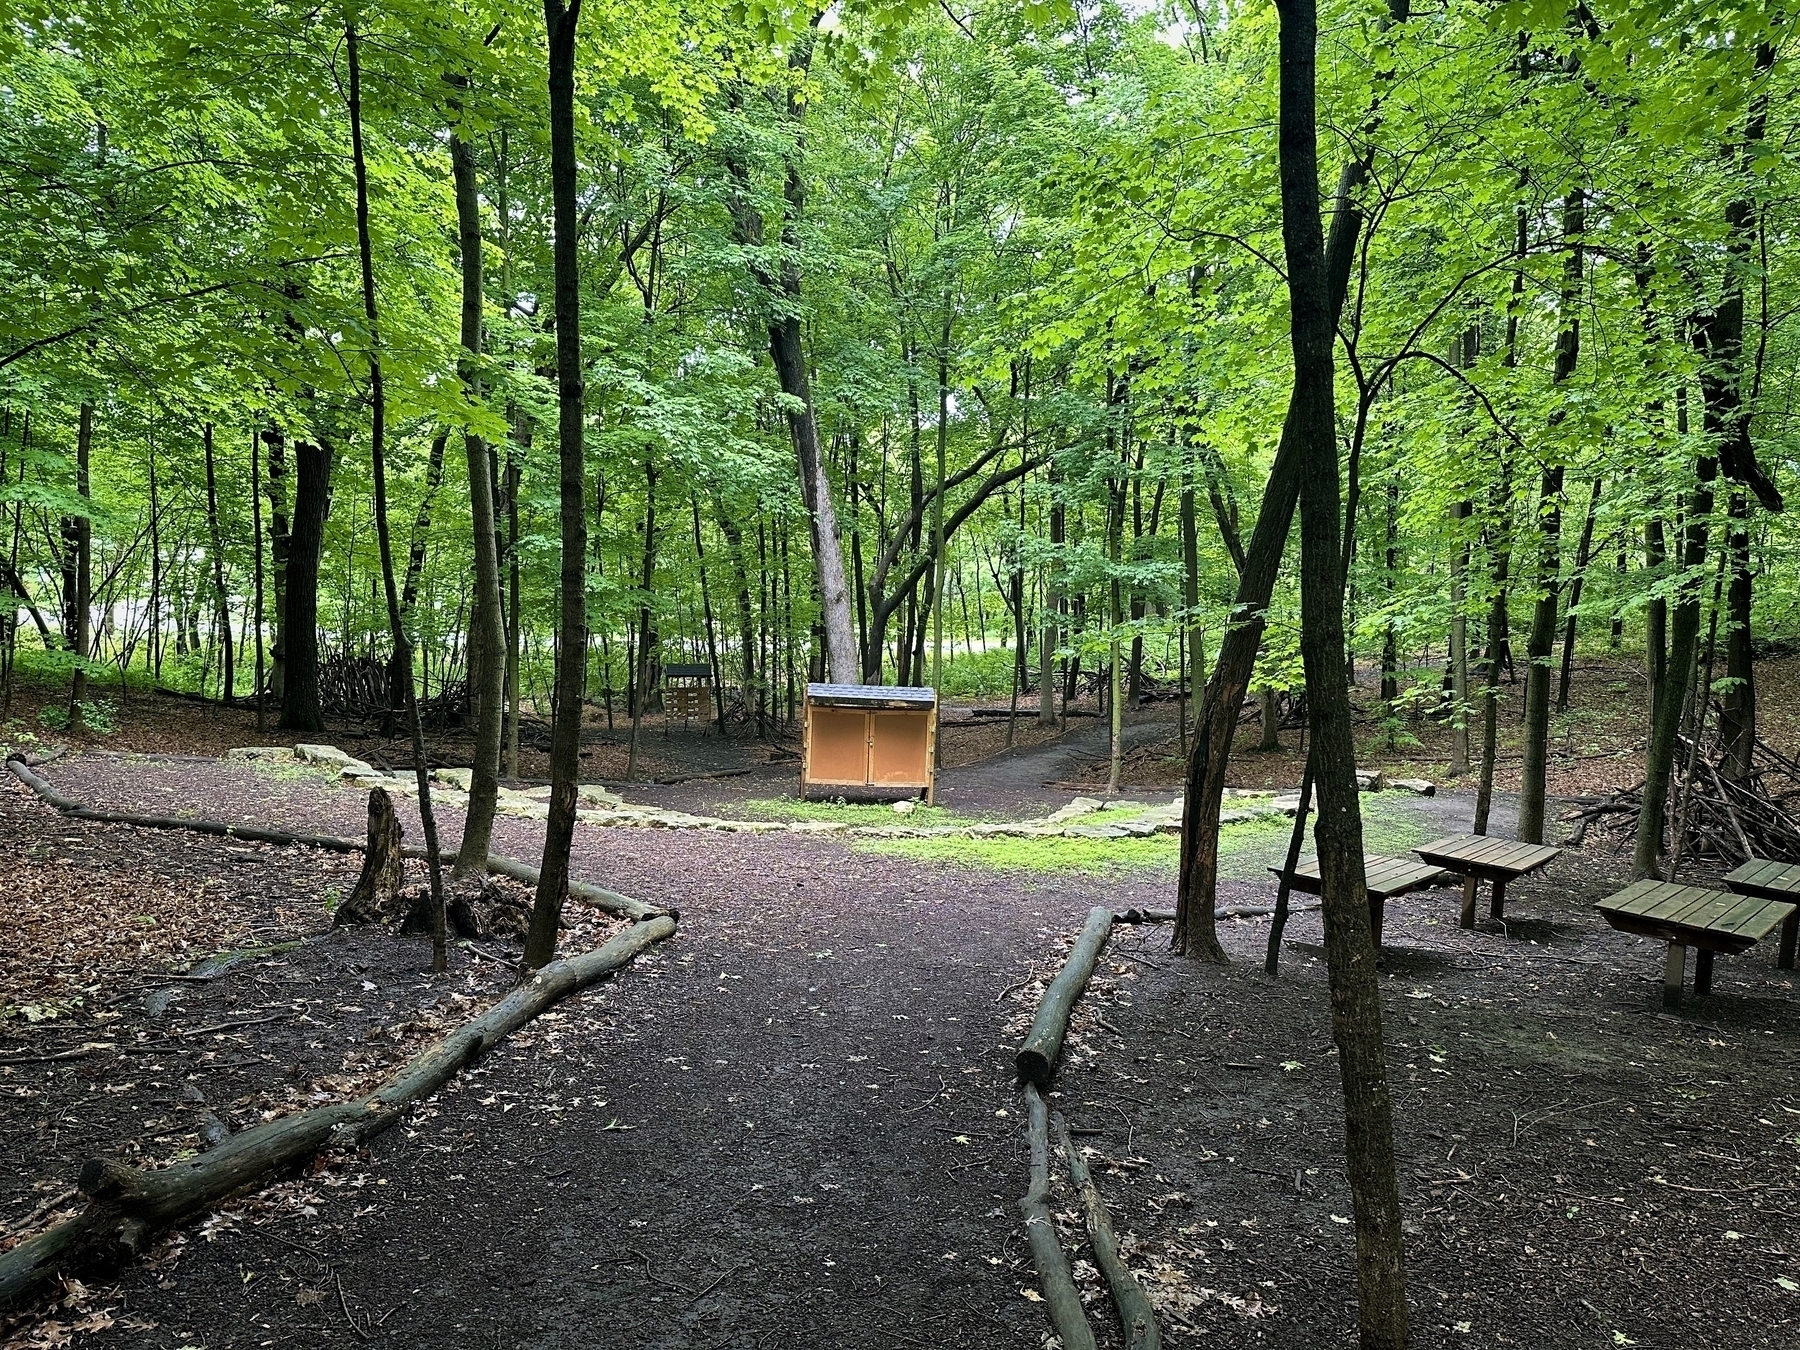 Small wooden structure standing amidst dense green trees with two picnic tables nearby on a dirt pathway in a forest setting